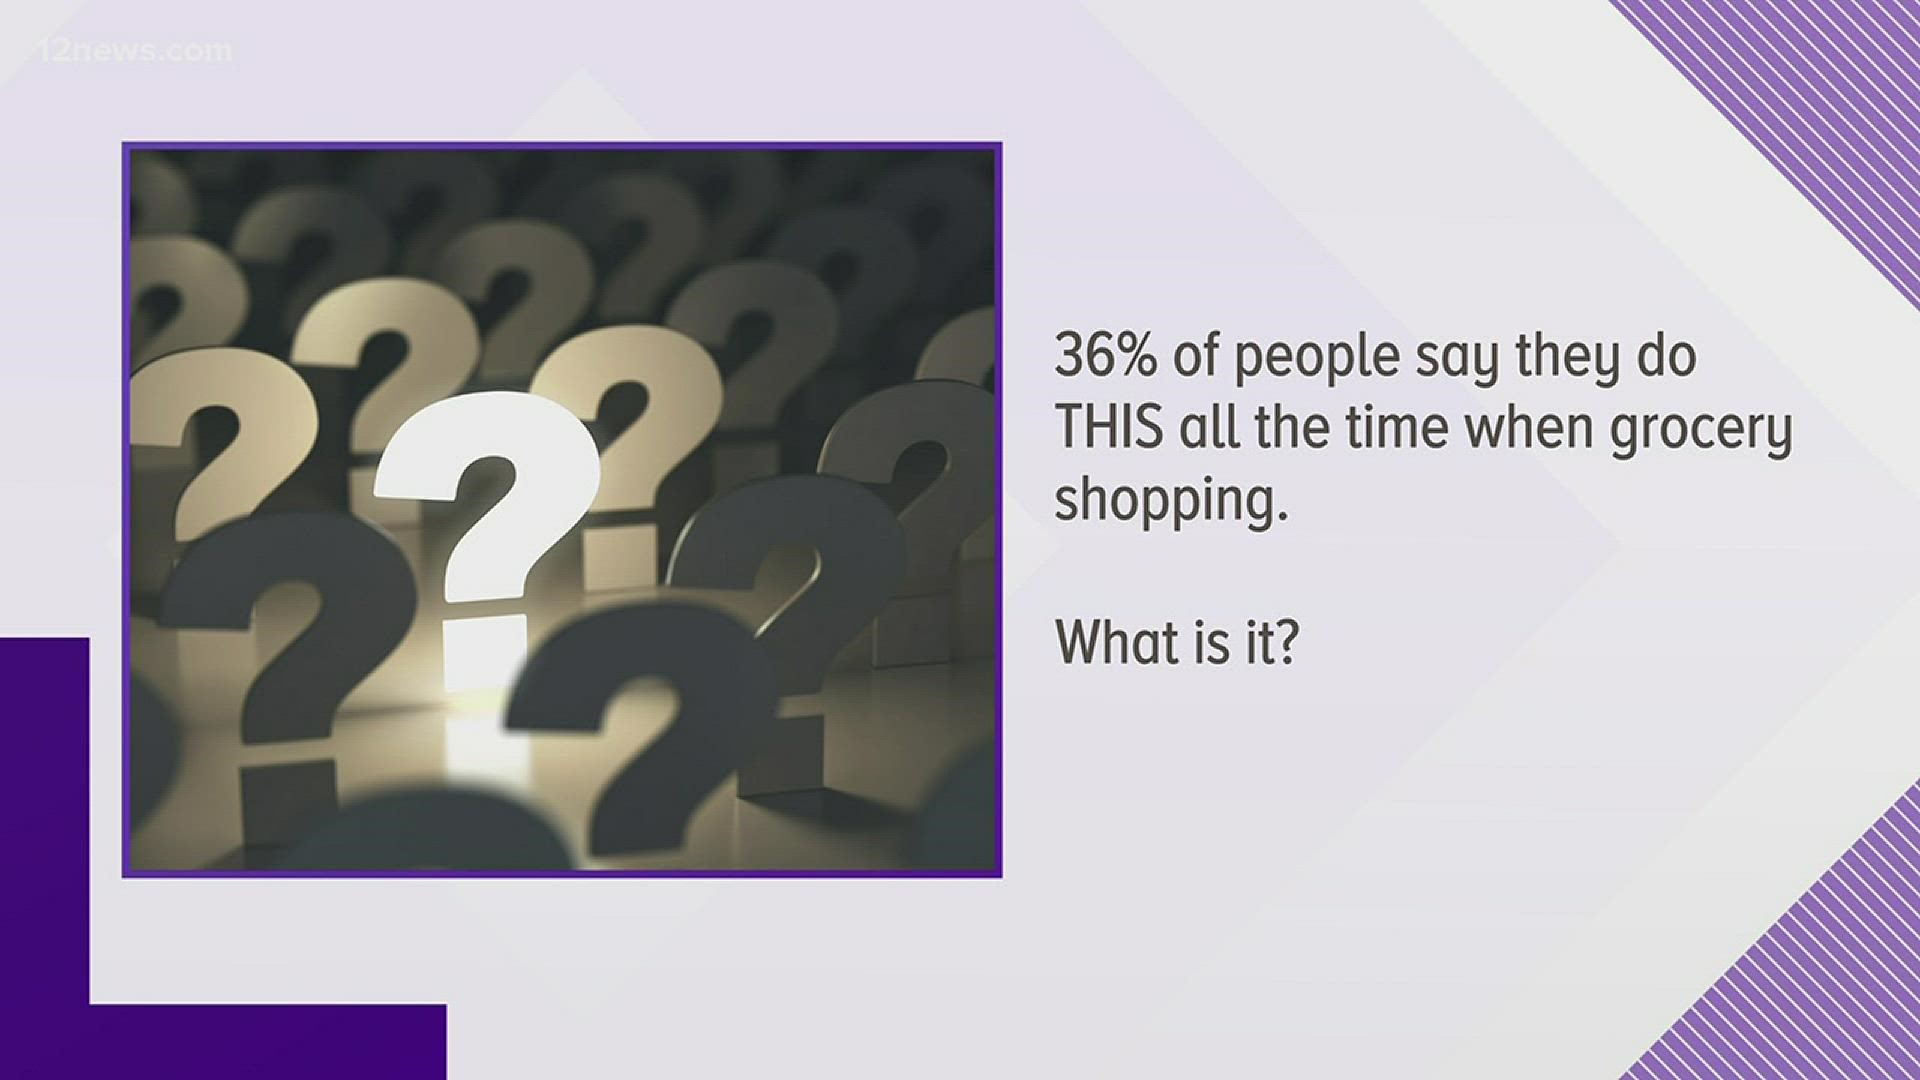 A little over a third of grocery store shoppers do what all the time?